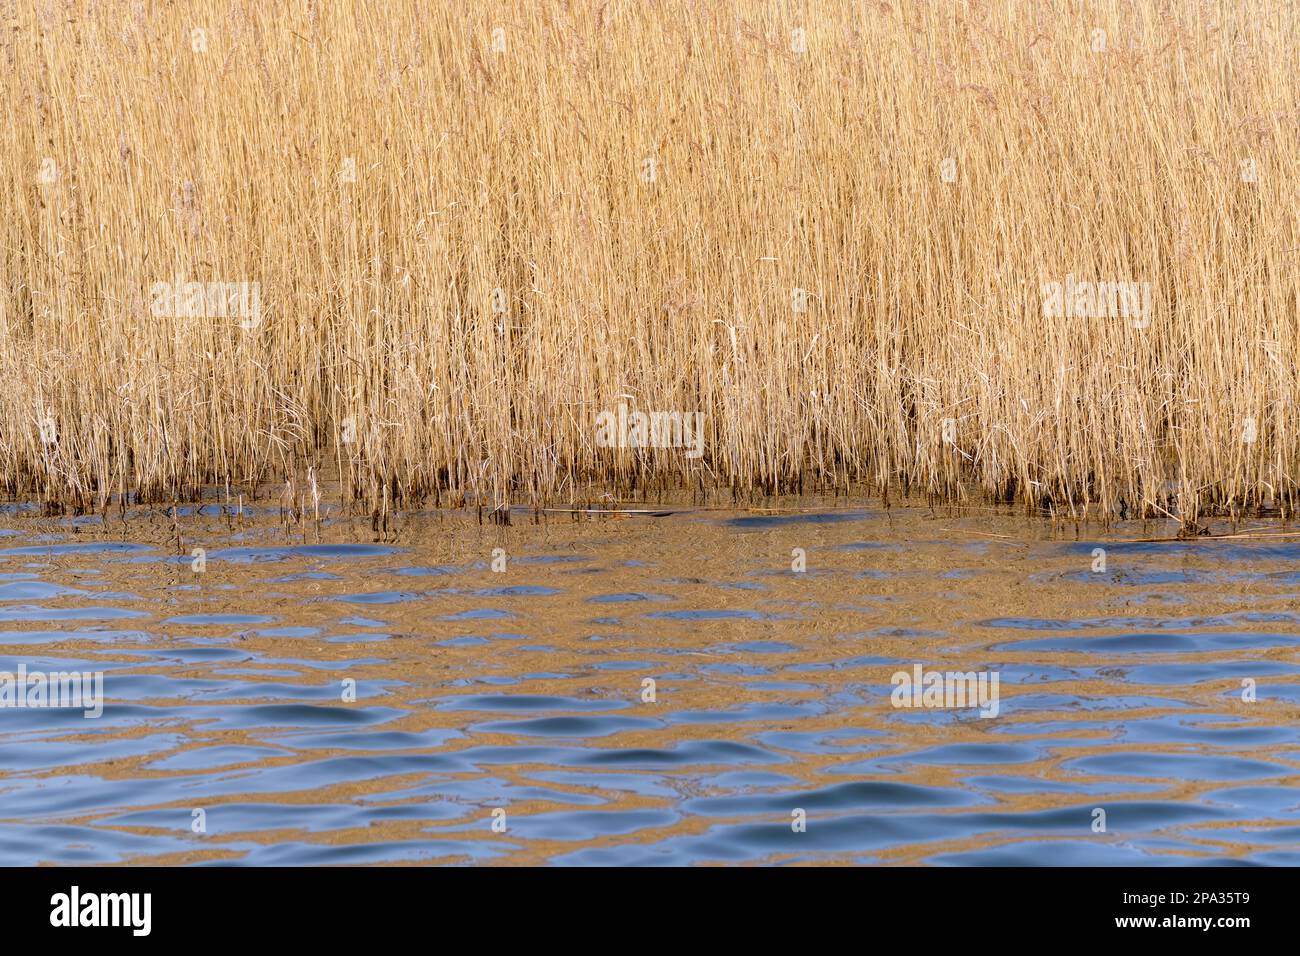 Reed stems in a large reed bed, reflecting in the blue water of a lake Stock Photo